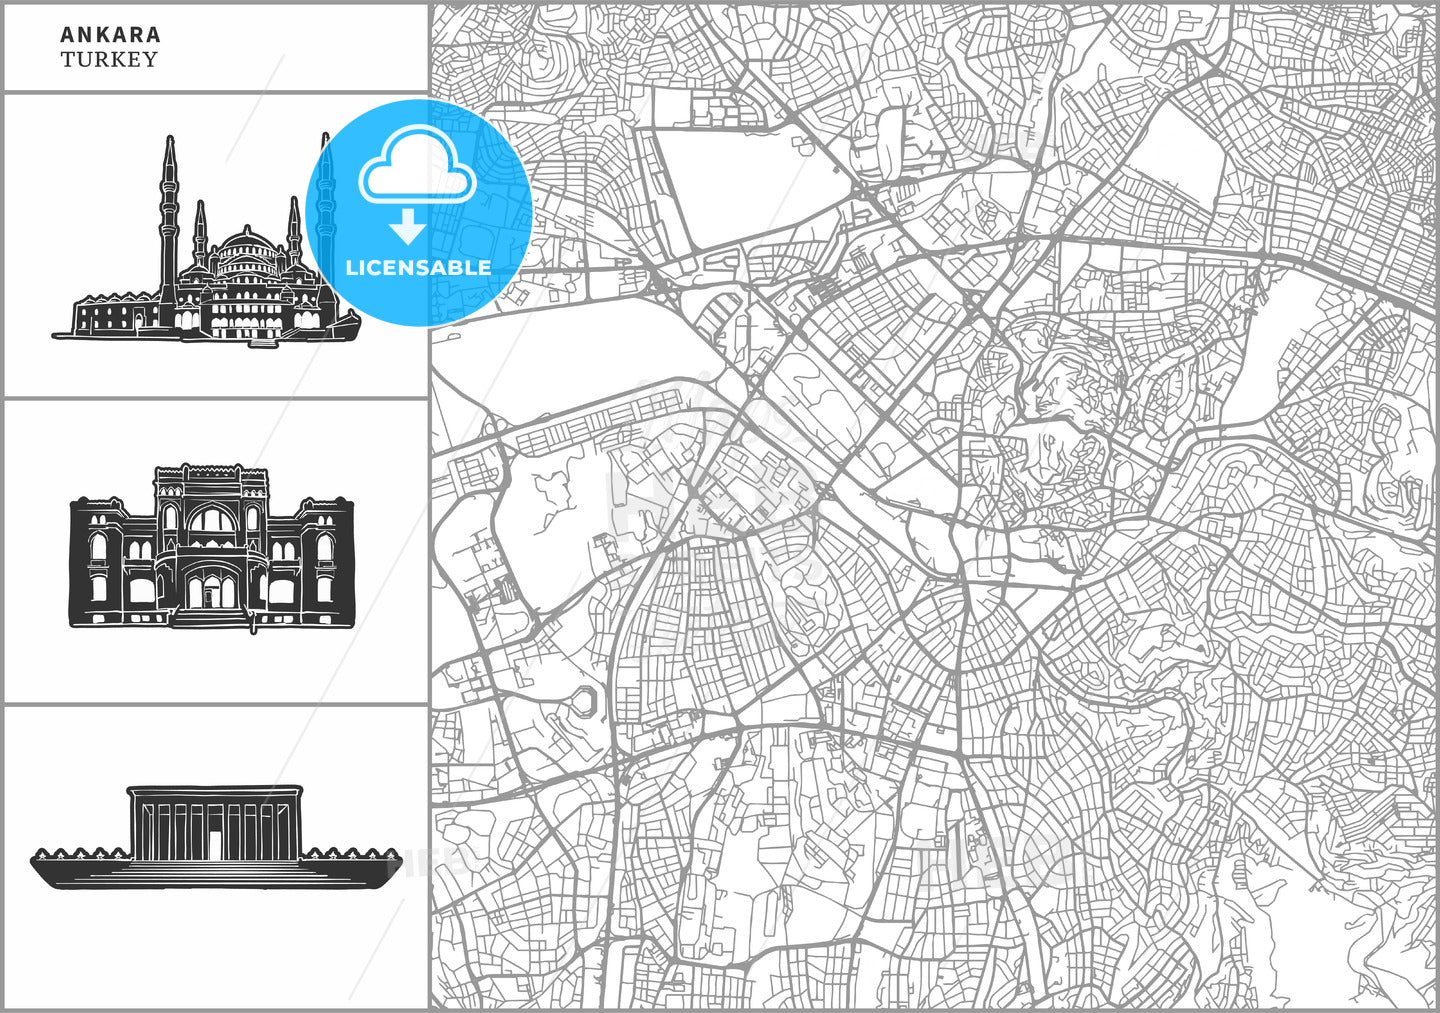 Ankara city map with hand-drawn architecture icons